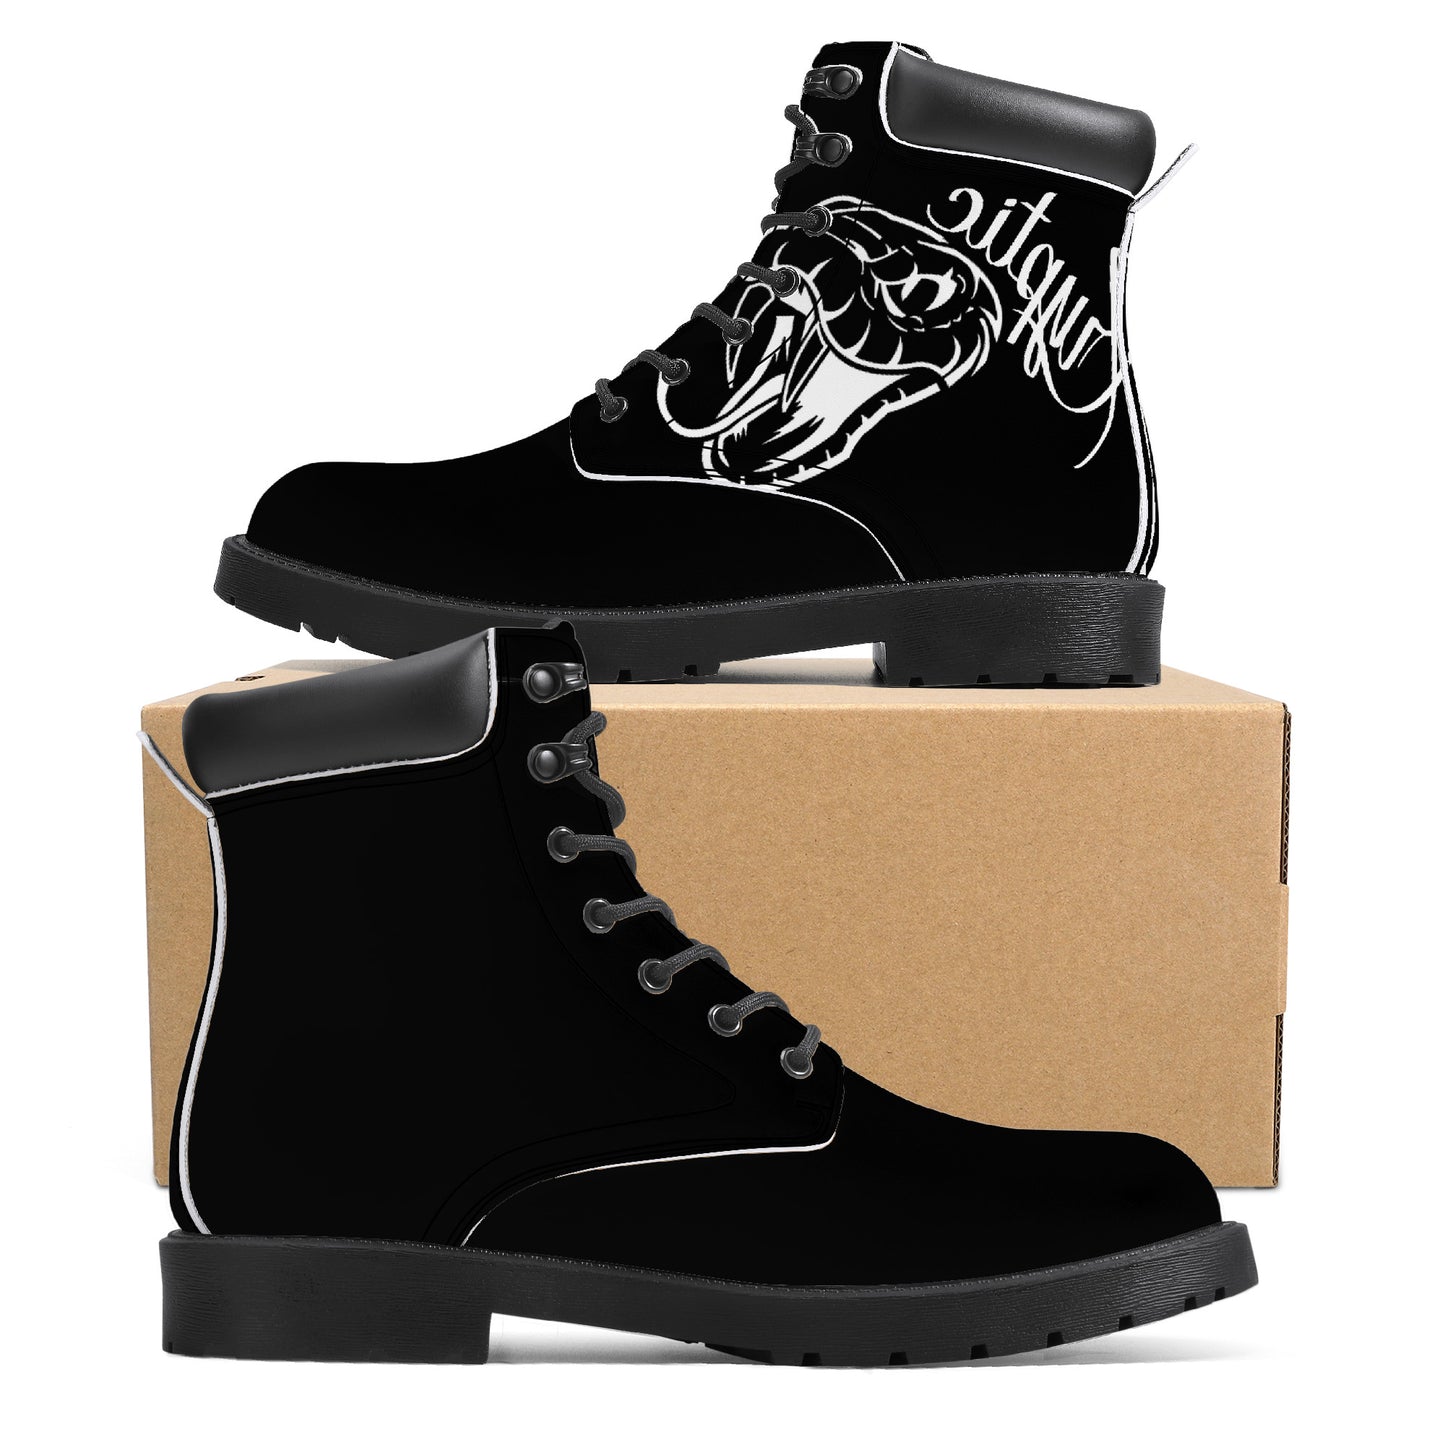 Cryptic Synthetic Leather Boots, Black